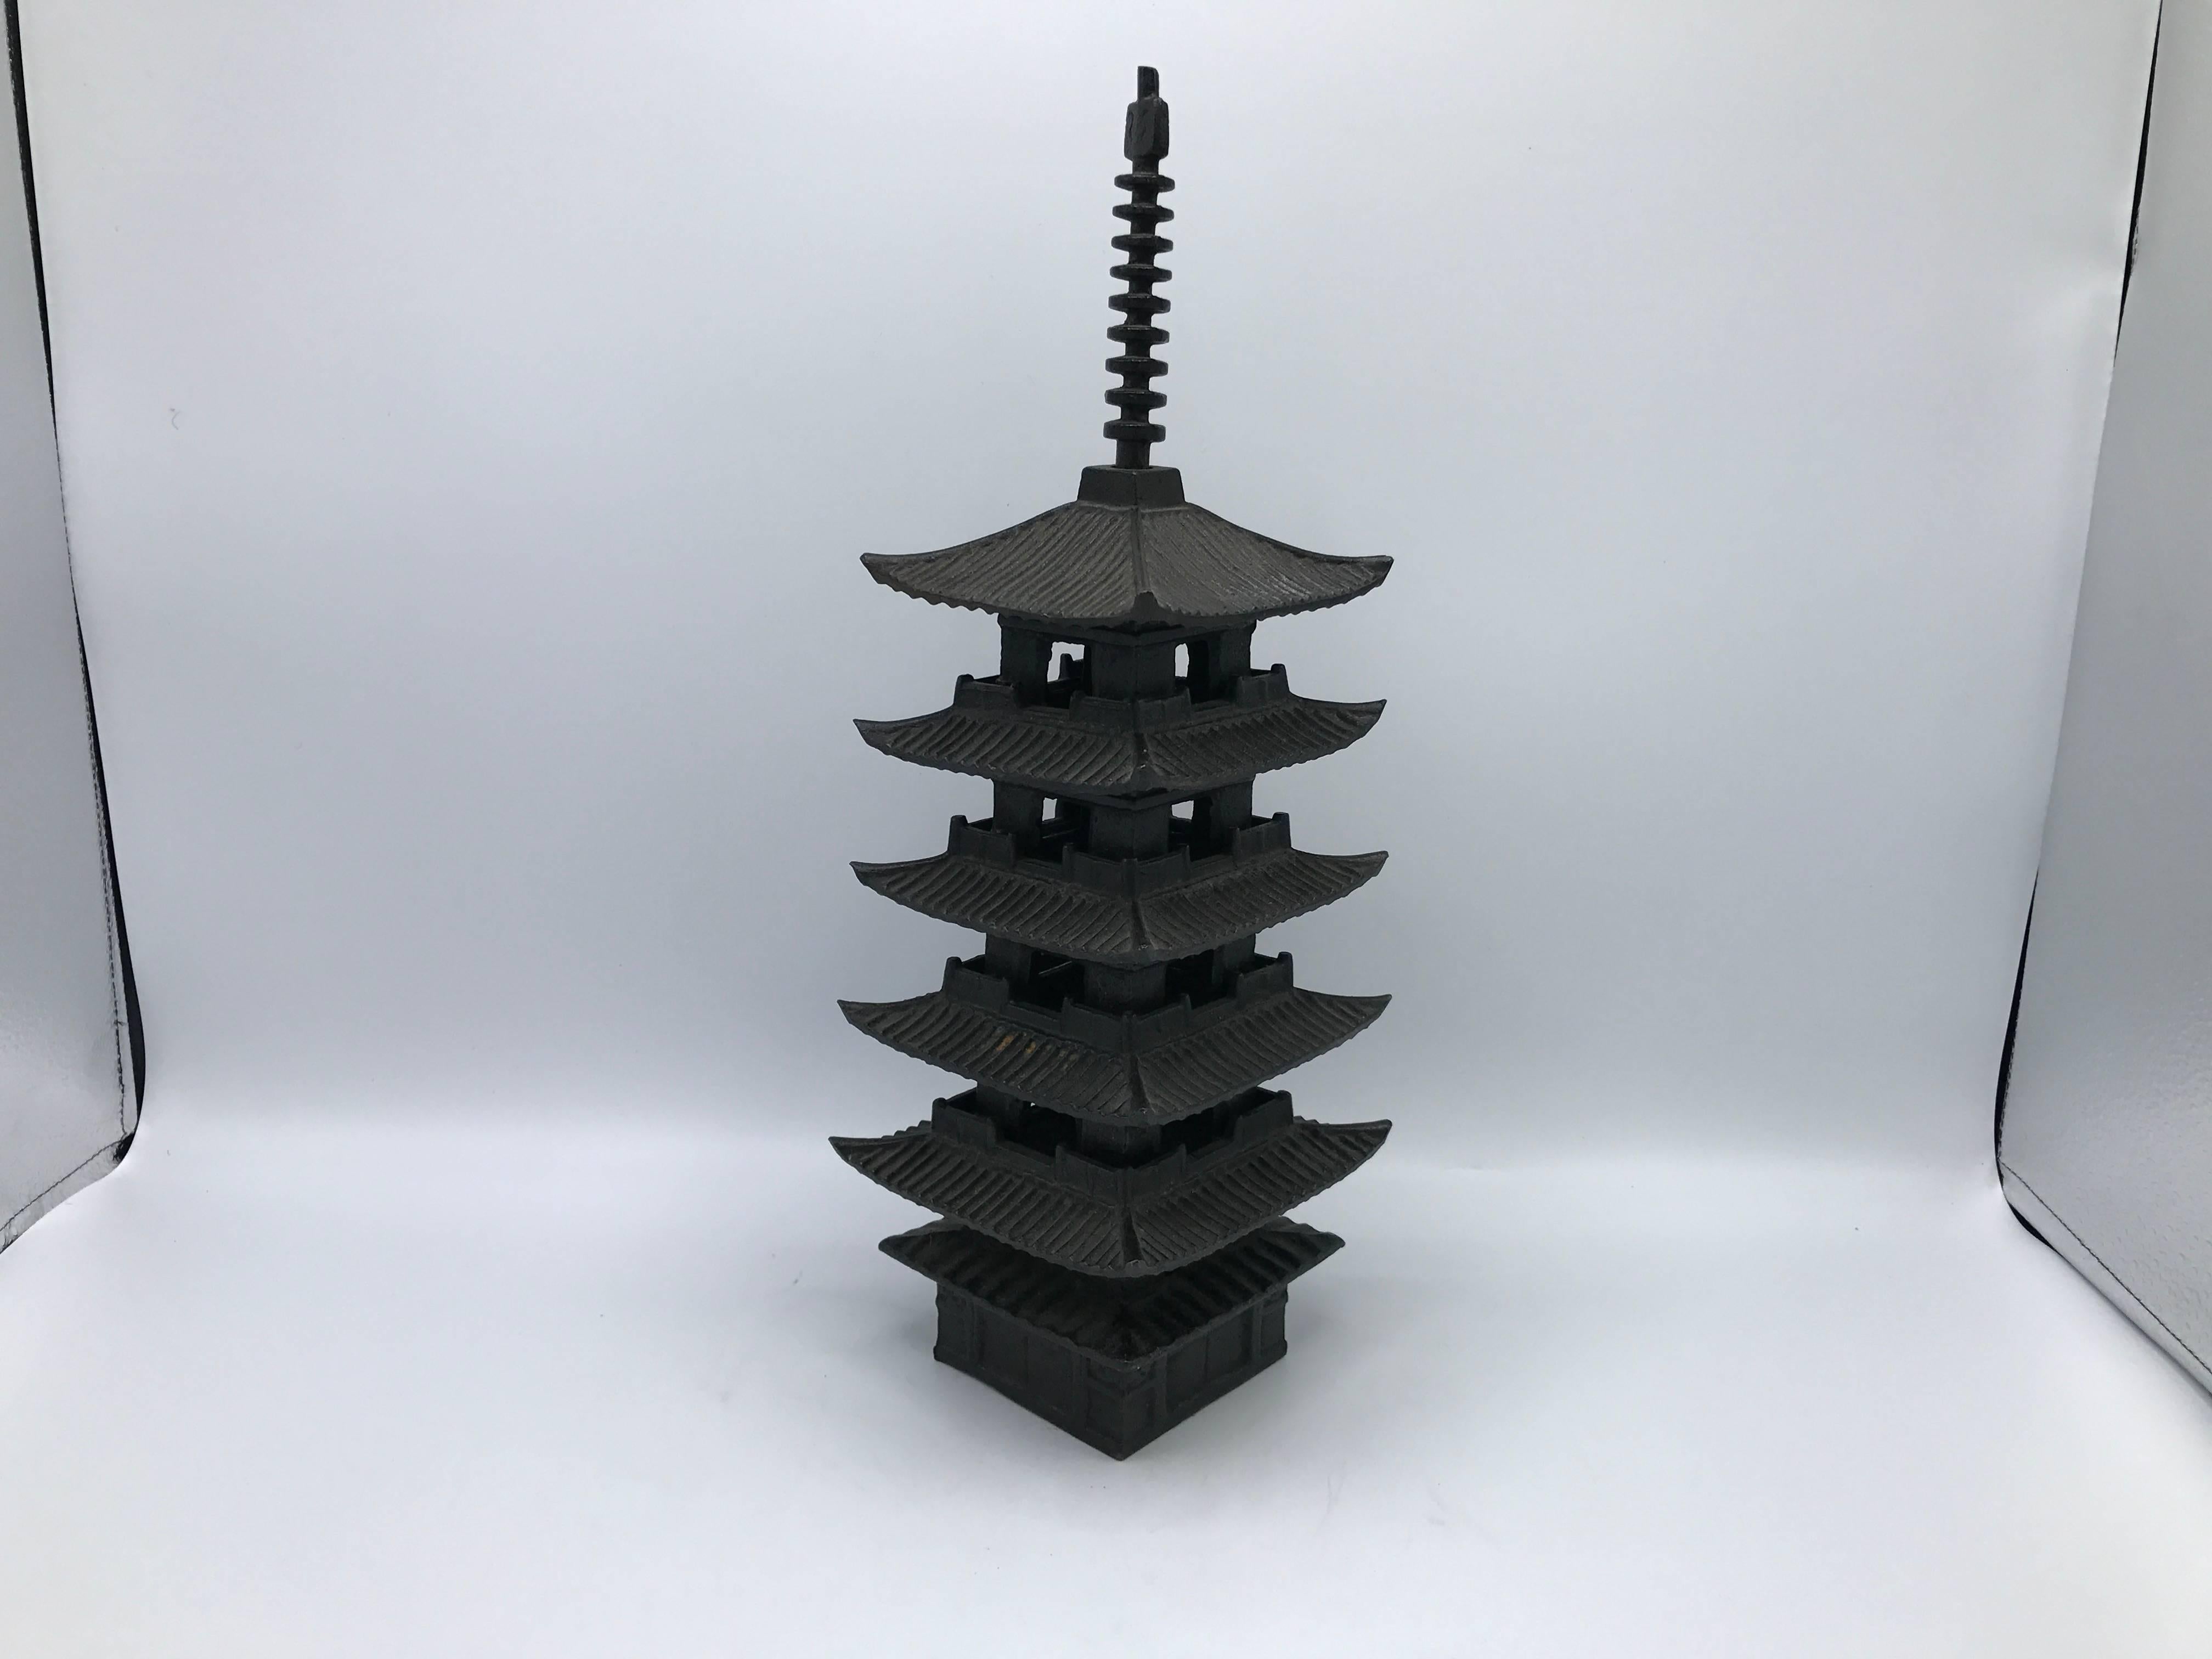 Offered is substantial and gorgeous, 1950s iron pagoda statue. Heavy.